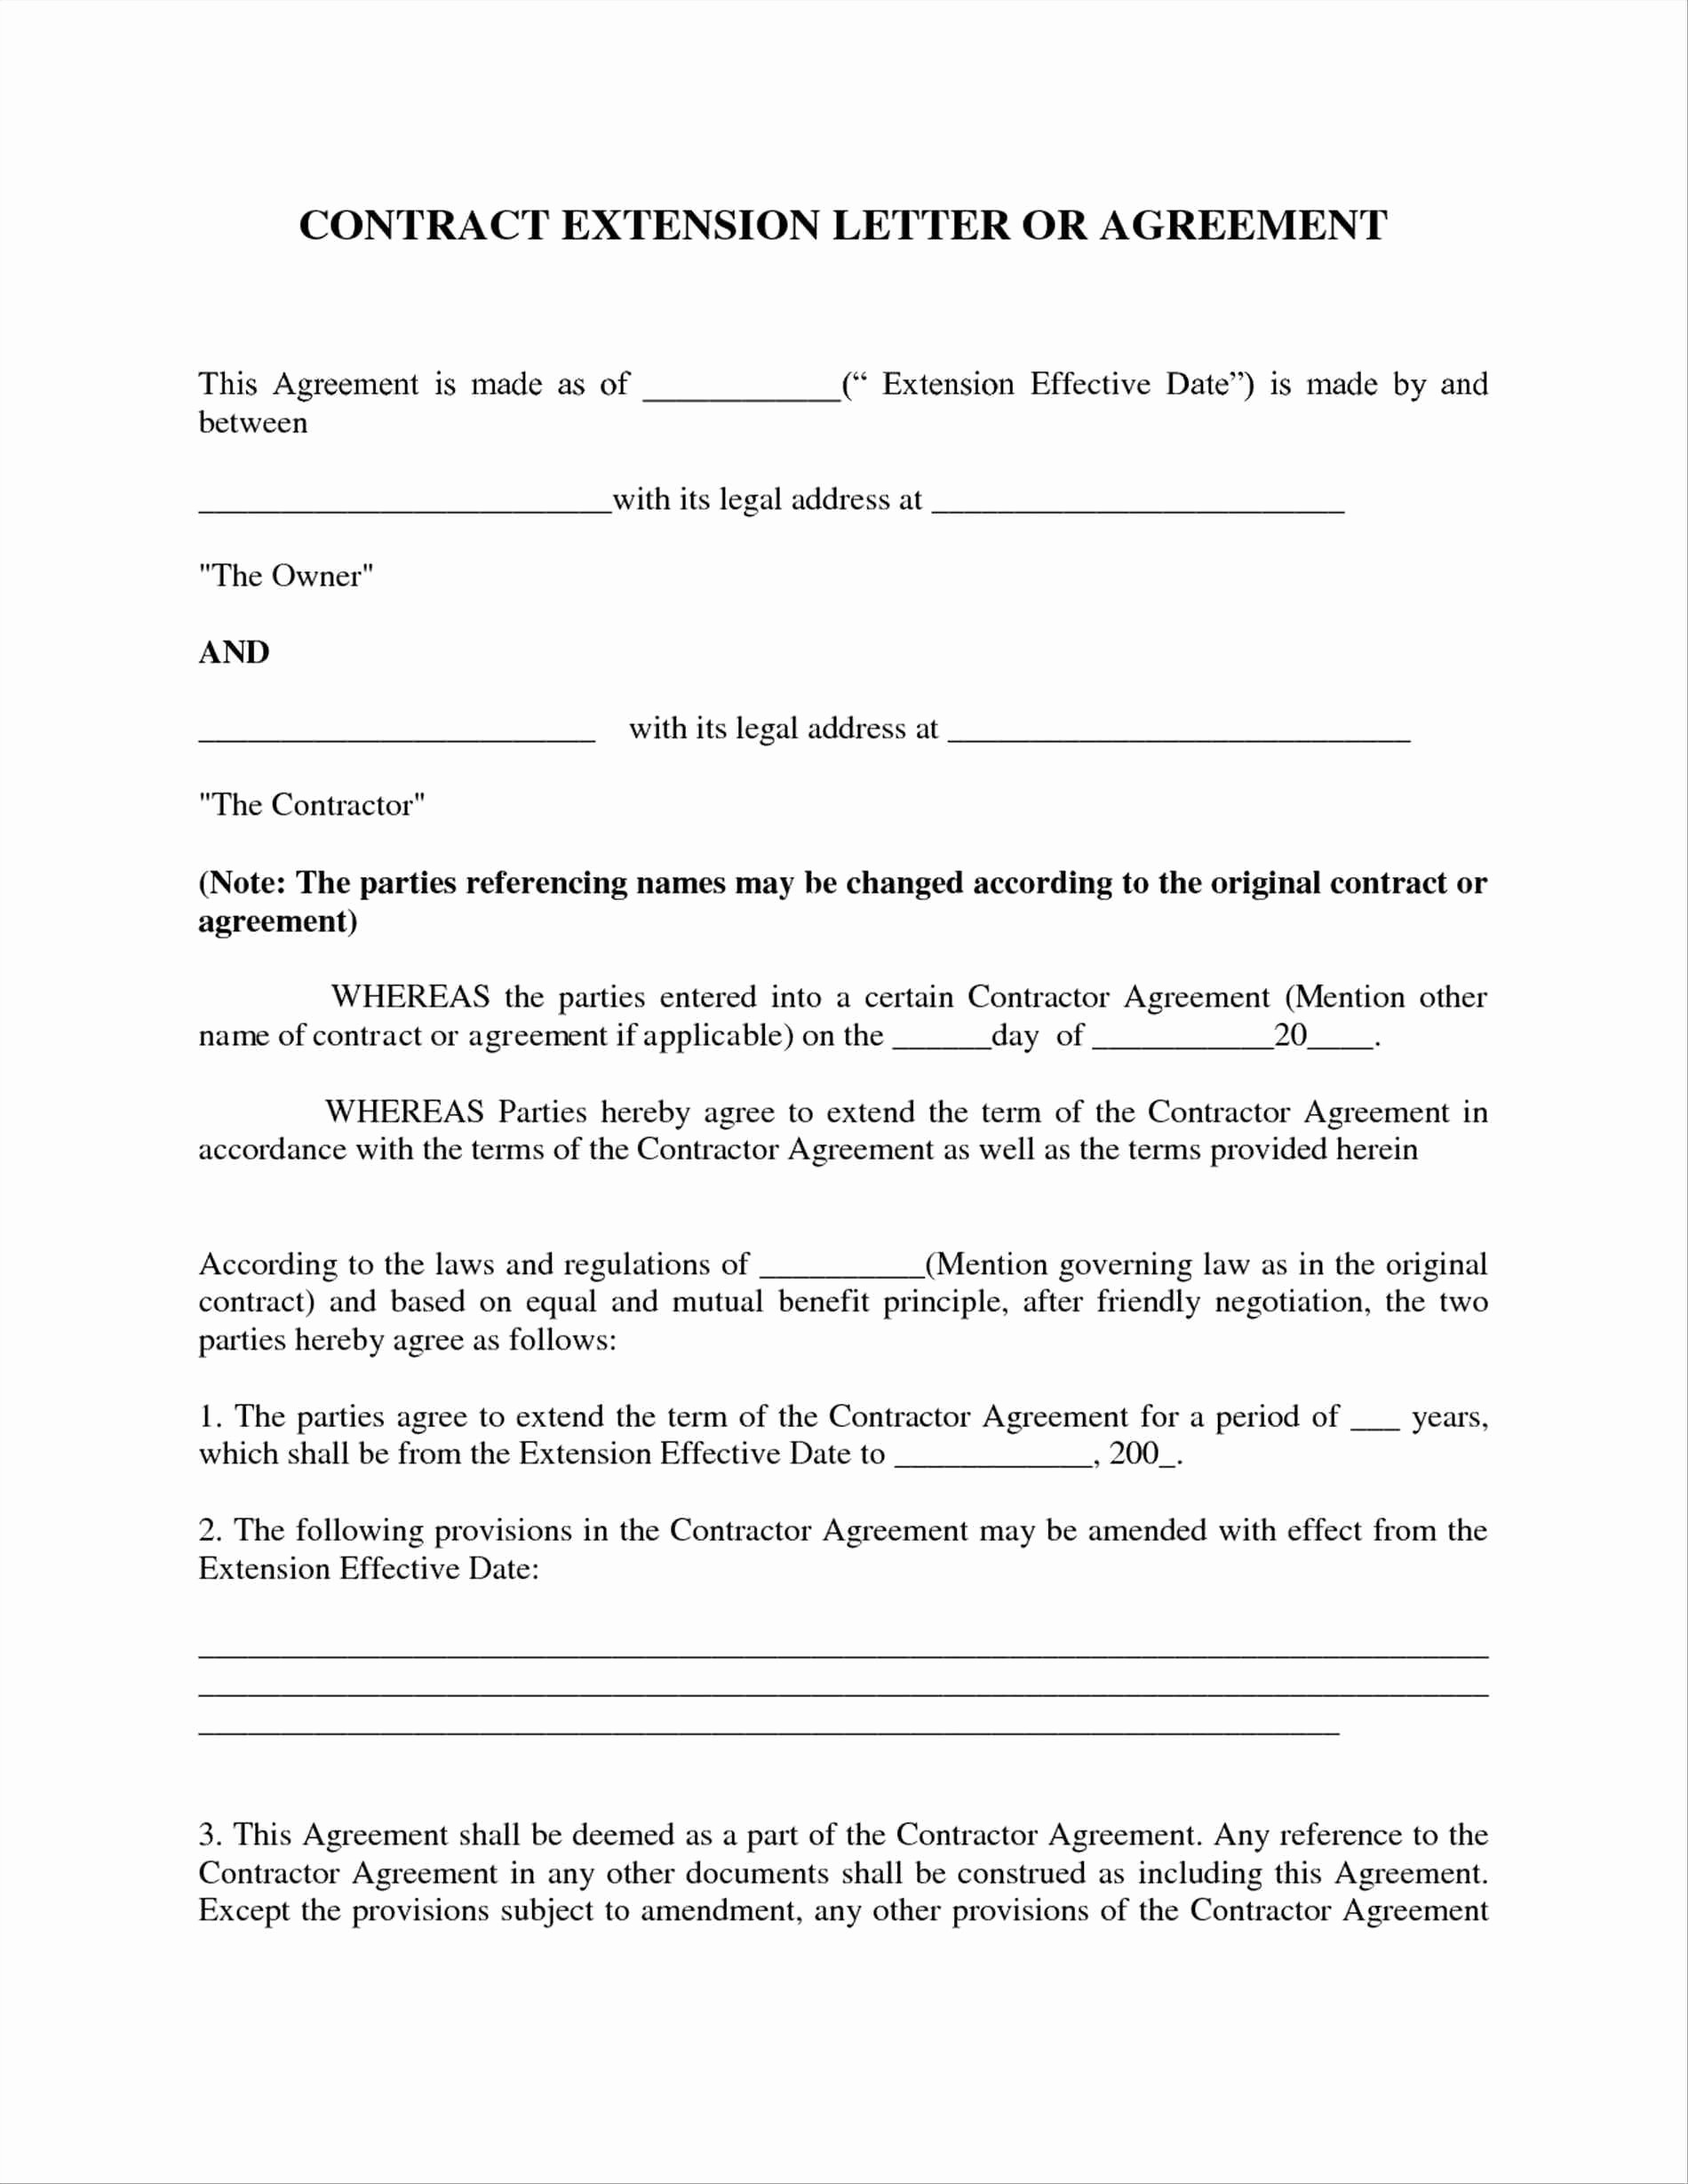 Agreement Letter Between Two Parties Sample 2 – cool green jobs